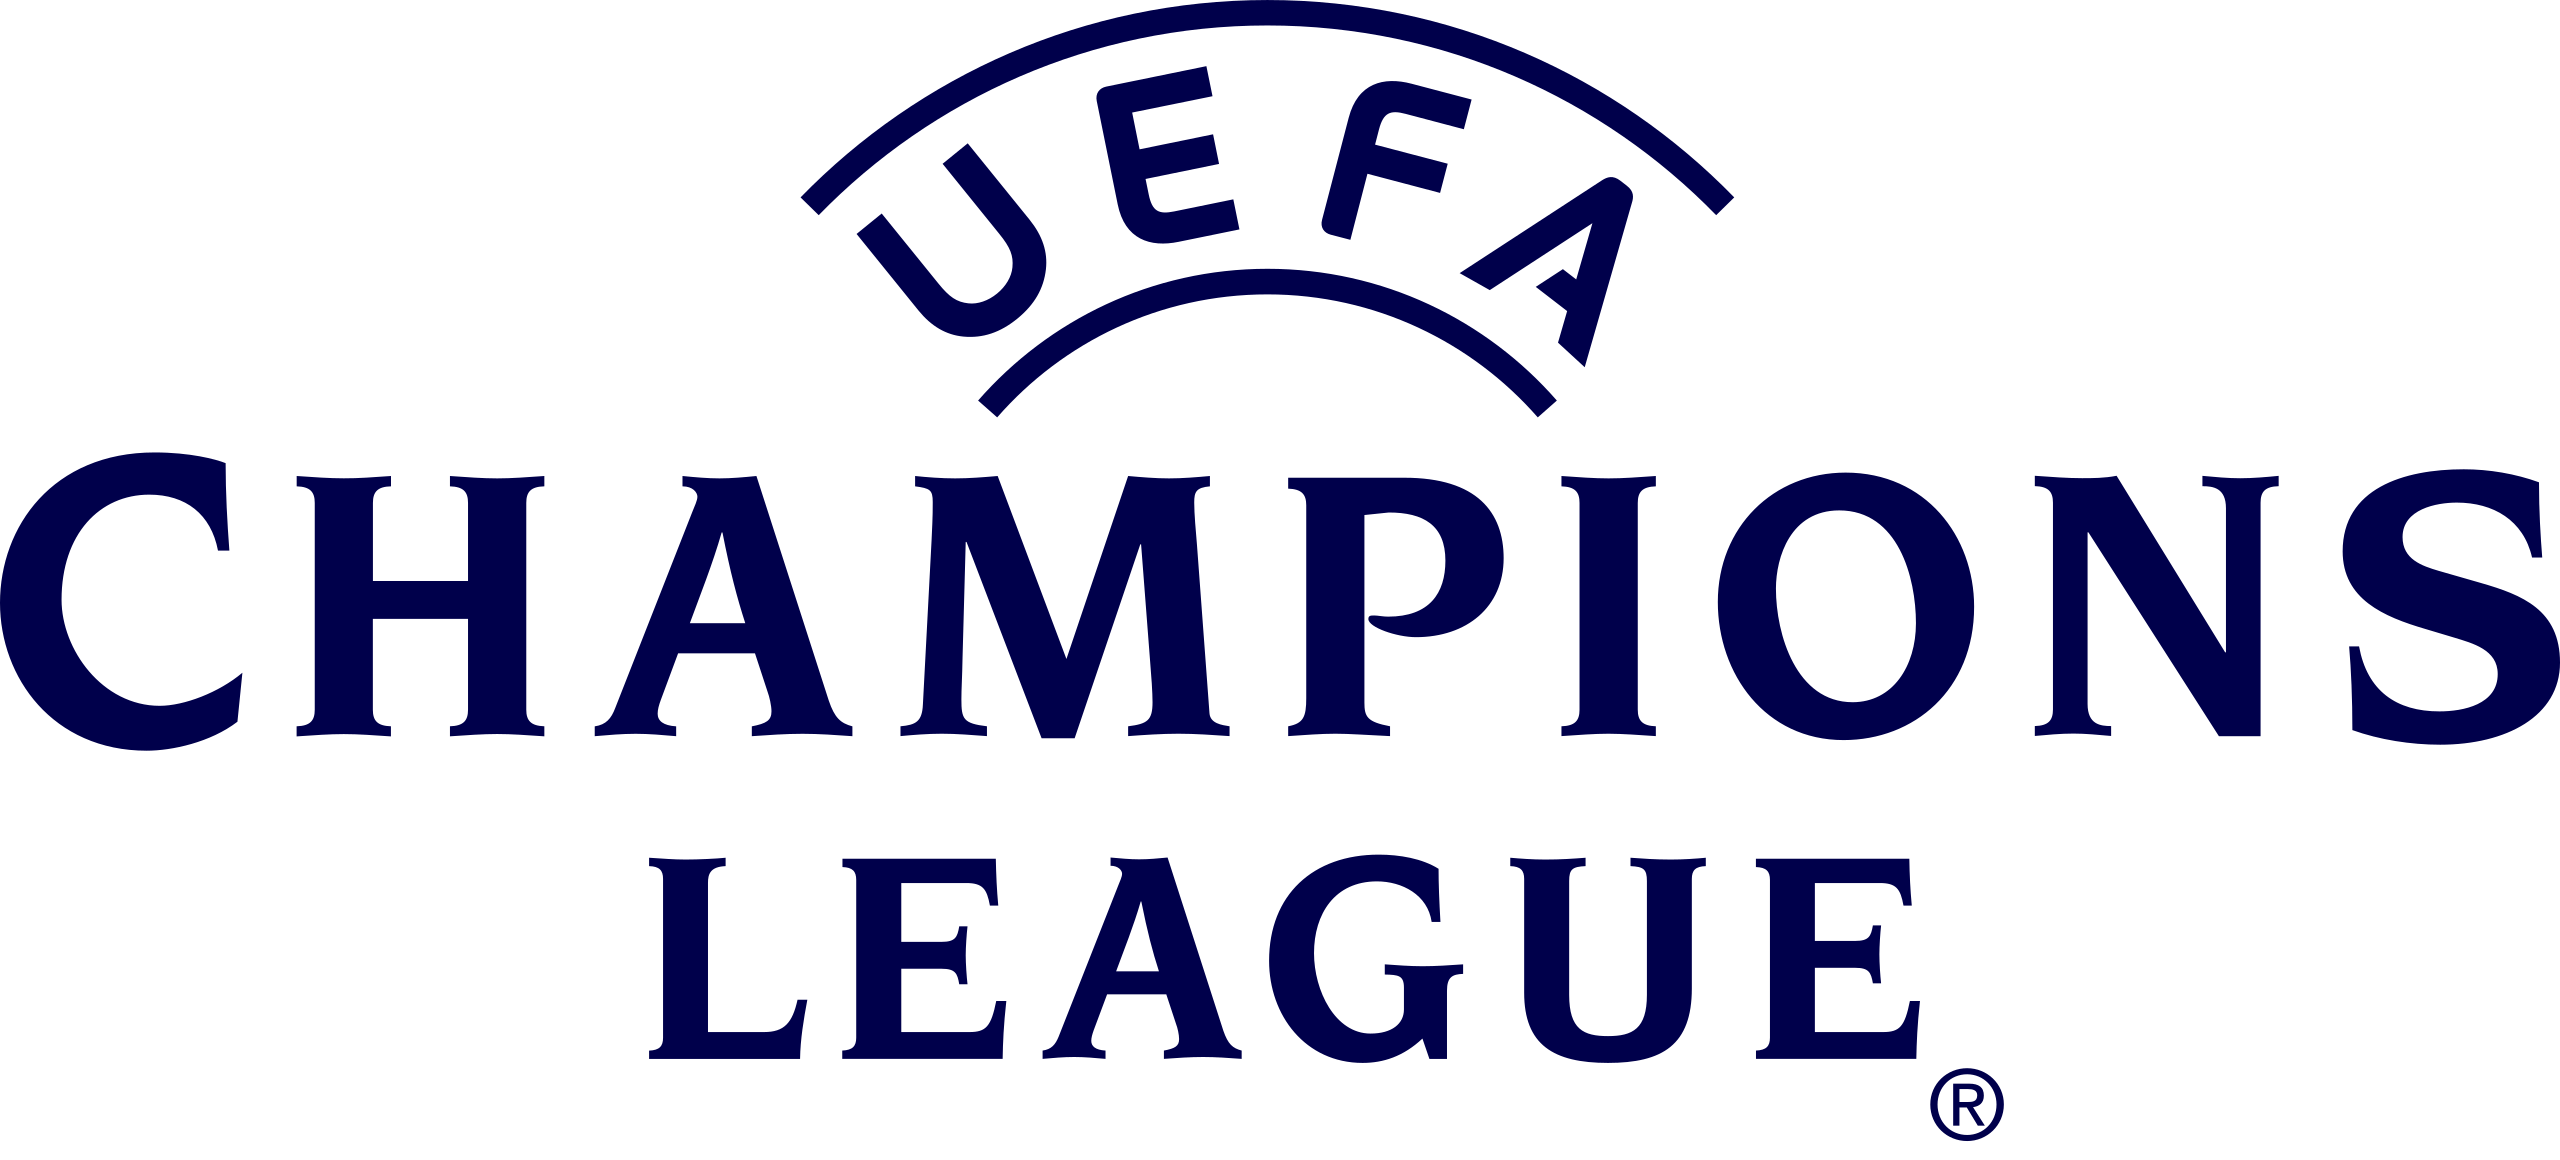 UEFA Champions League Background PNG Image | PNG Play